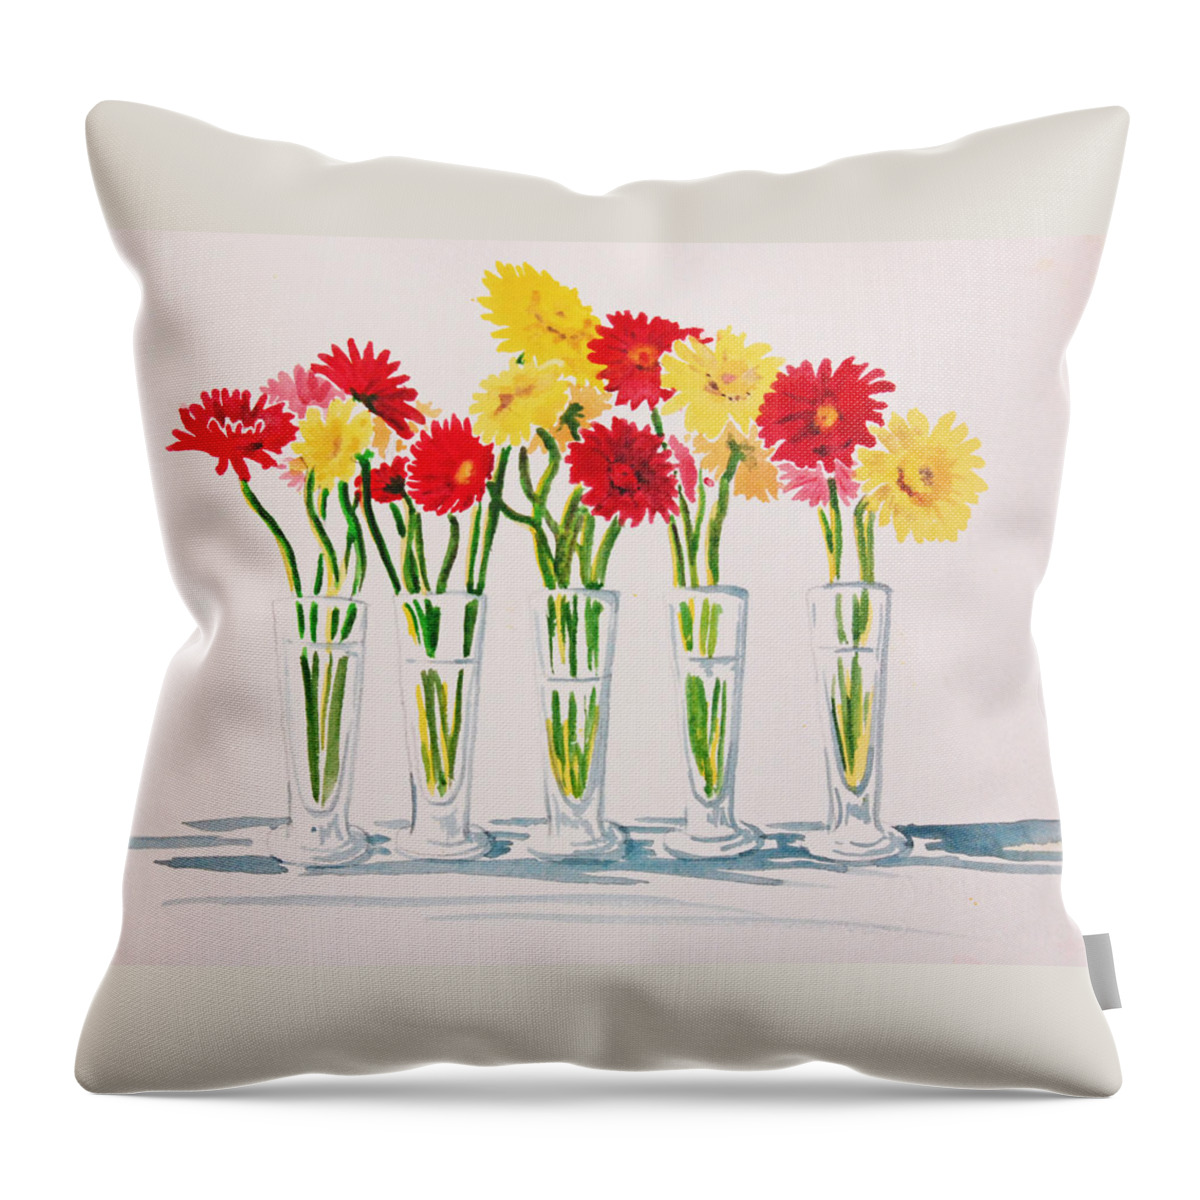 Floral Throw Pillow featuring the painting Zinnias in a row by Heidi E Nelson